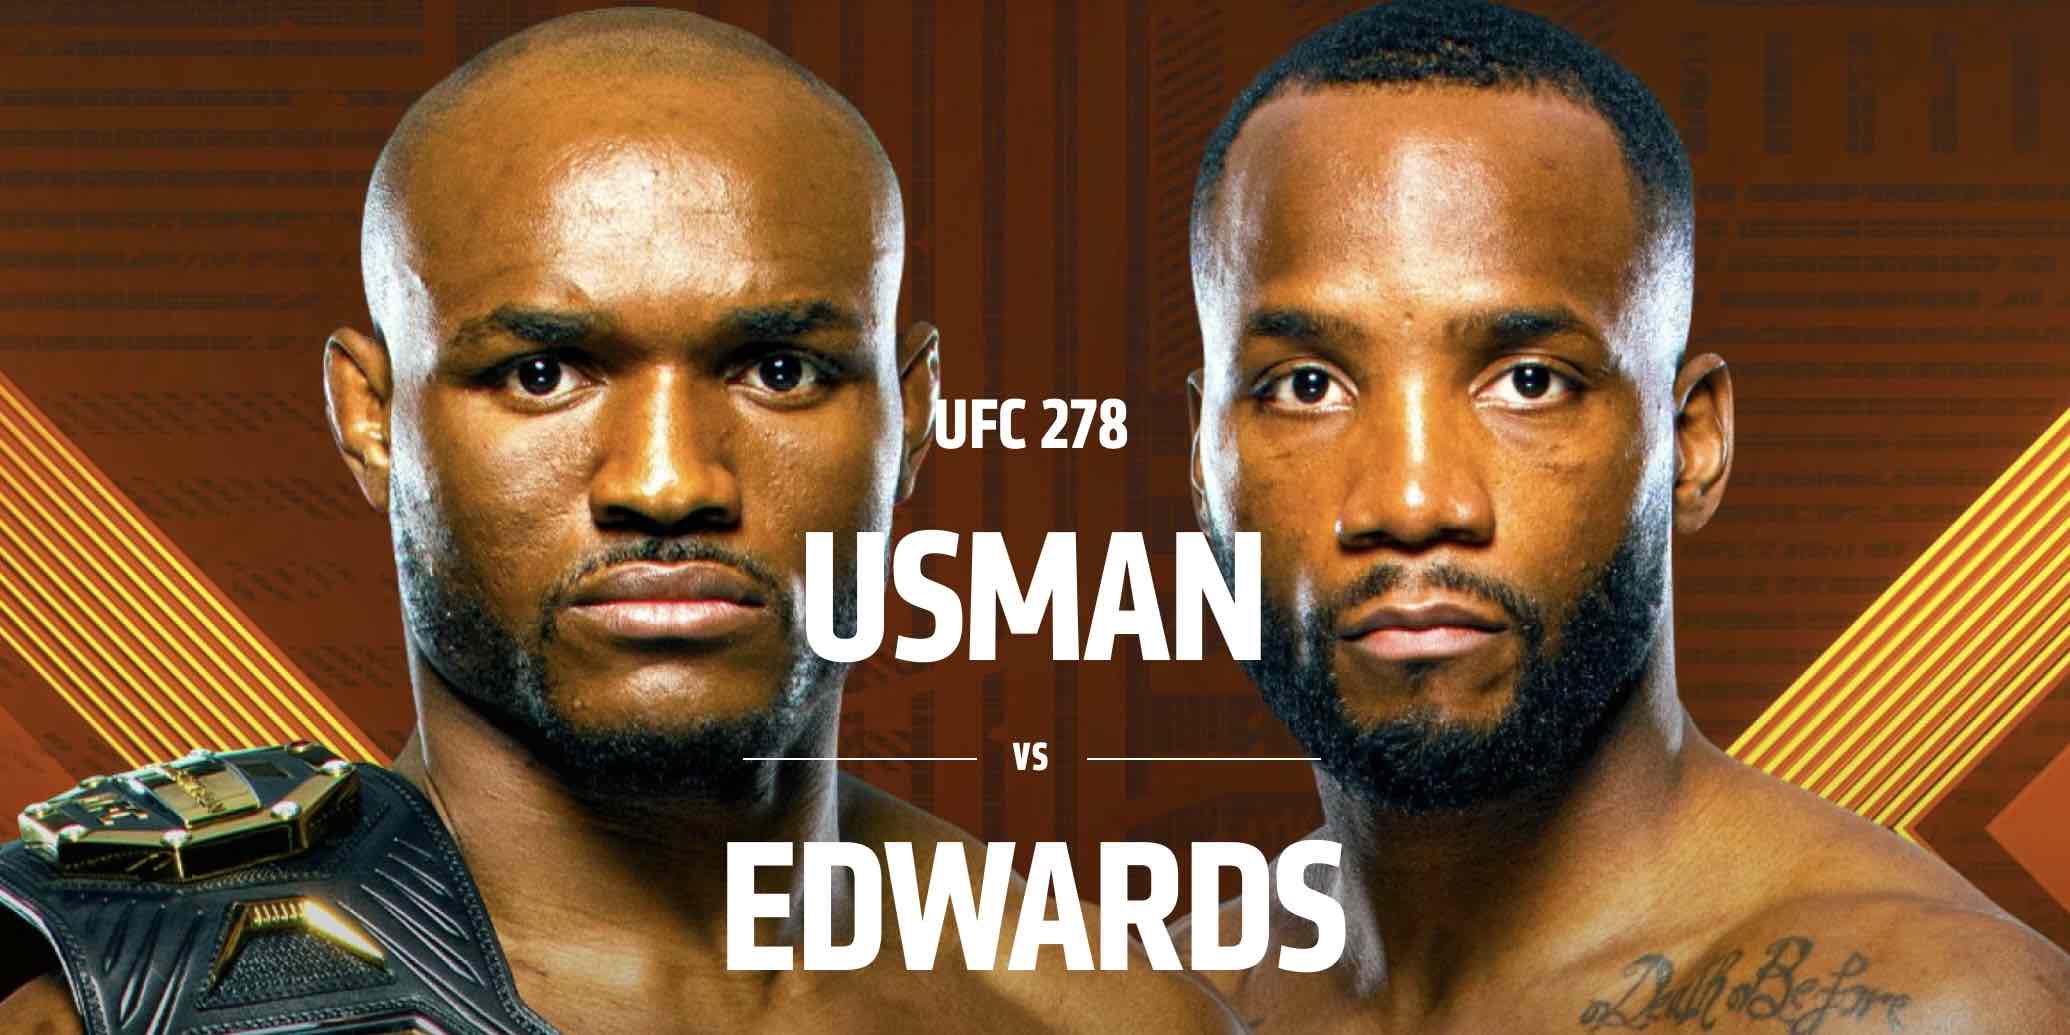 How to watch UFC 278 Usman vs Edwards on iPhone, Apple TV, web